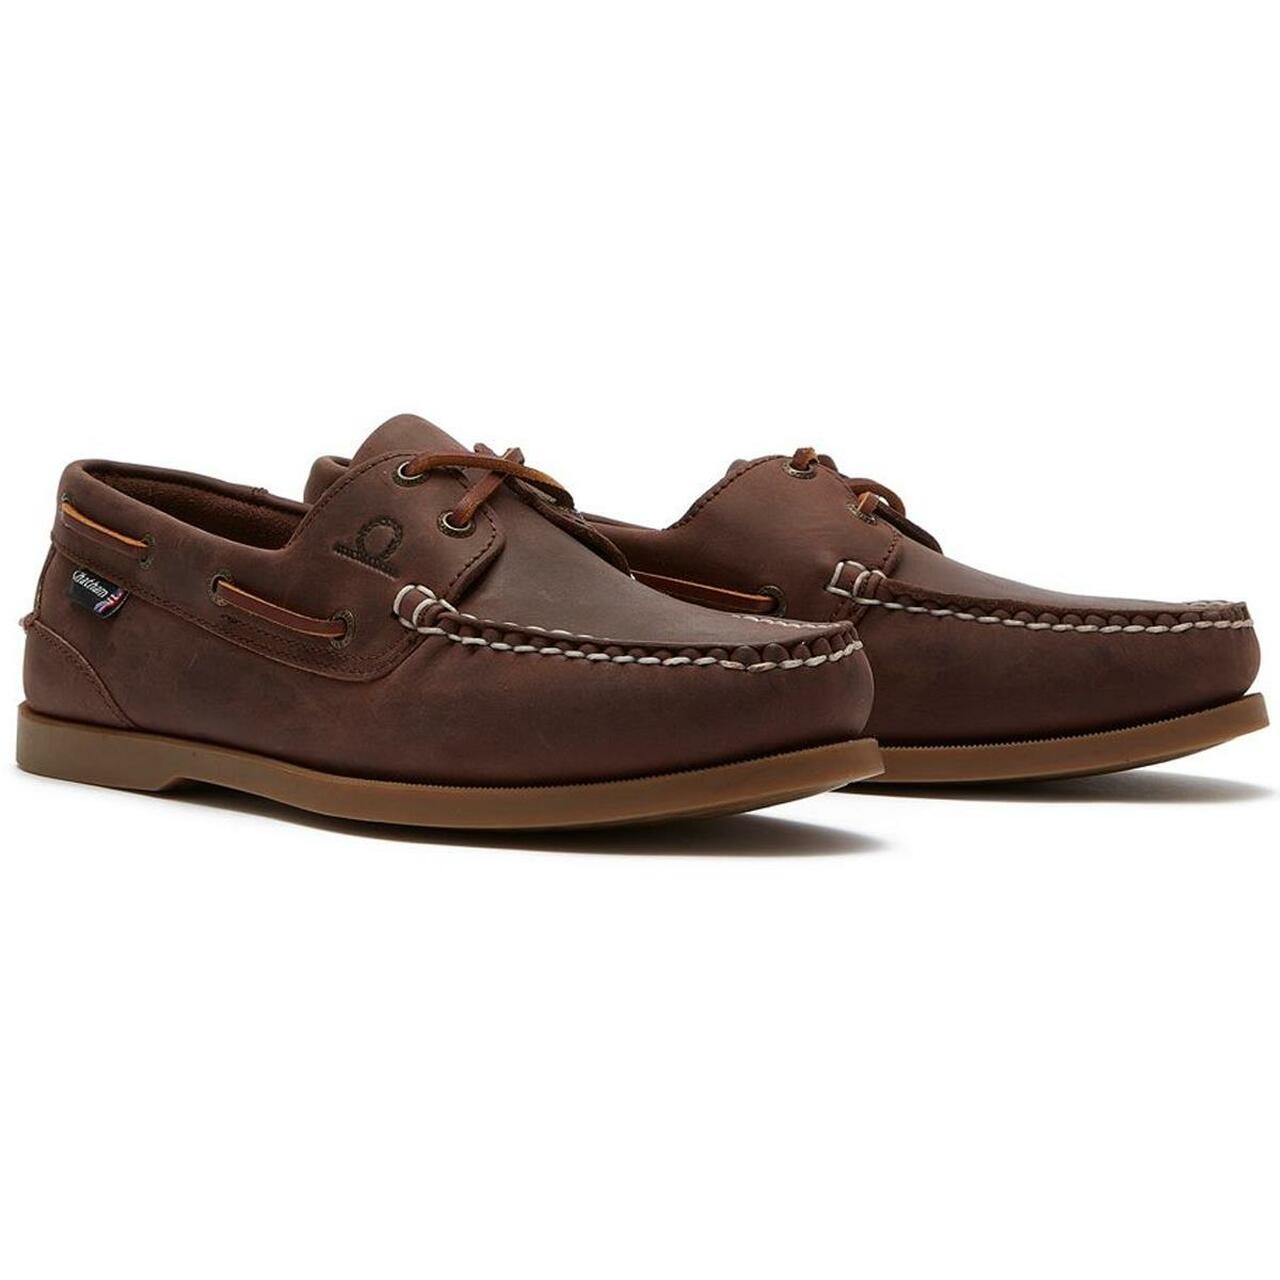 50% OFF - CHATHAM Mens Deck II G2 Leather Boat Shoes - Chocolate - Size: UK 6 (EU40)